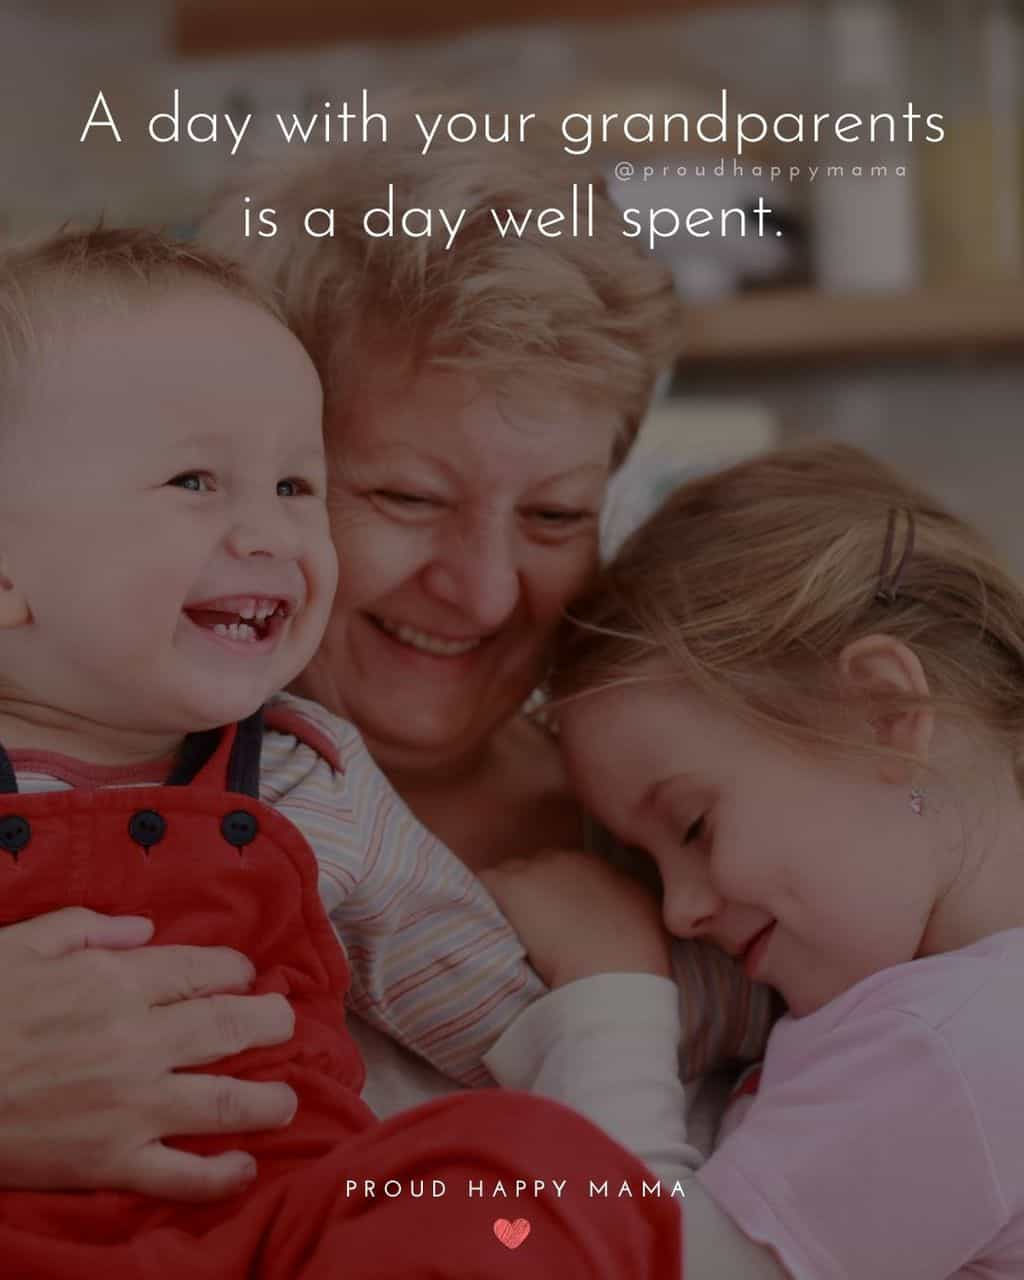 Grandparent Quotes – A day with your grandparents is a day well spent.’